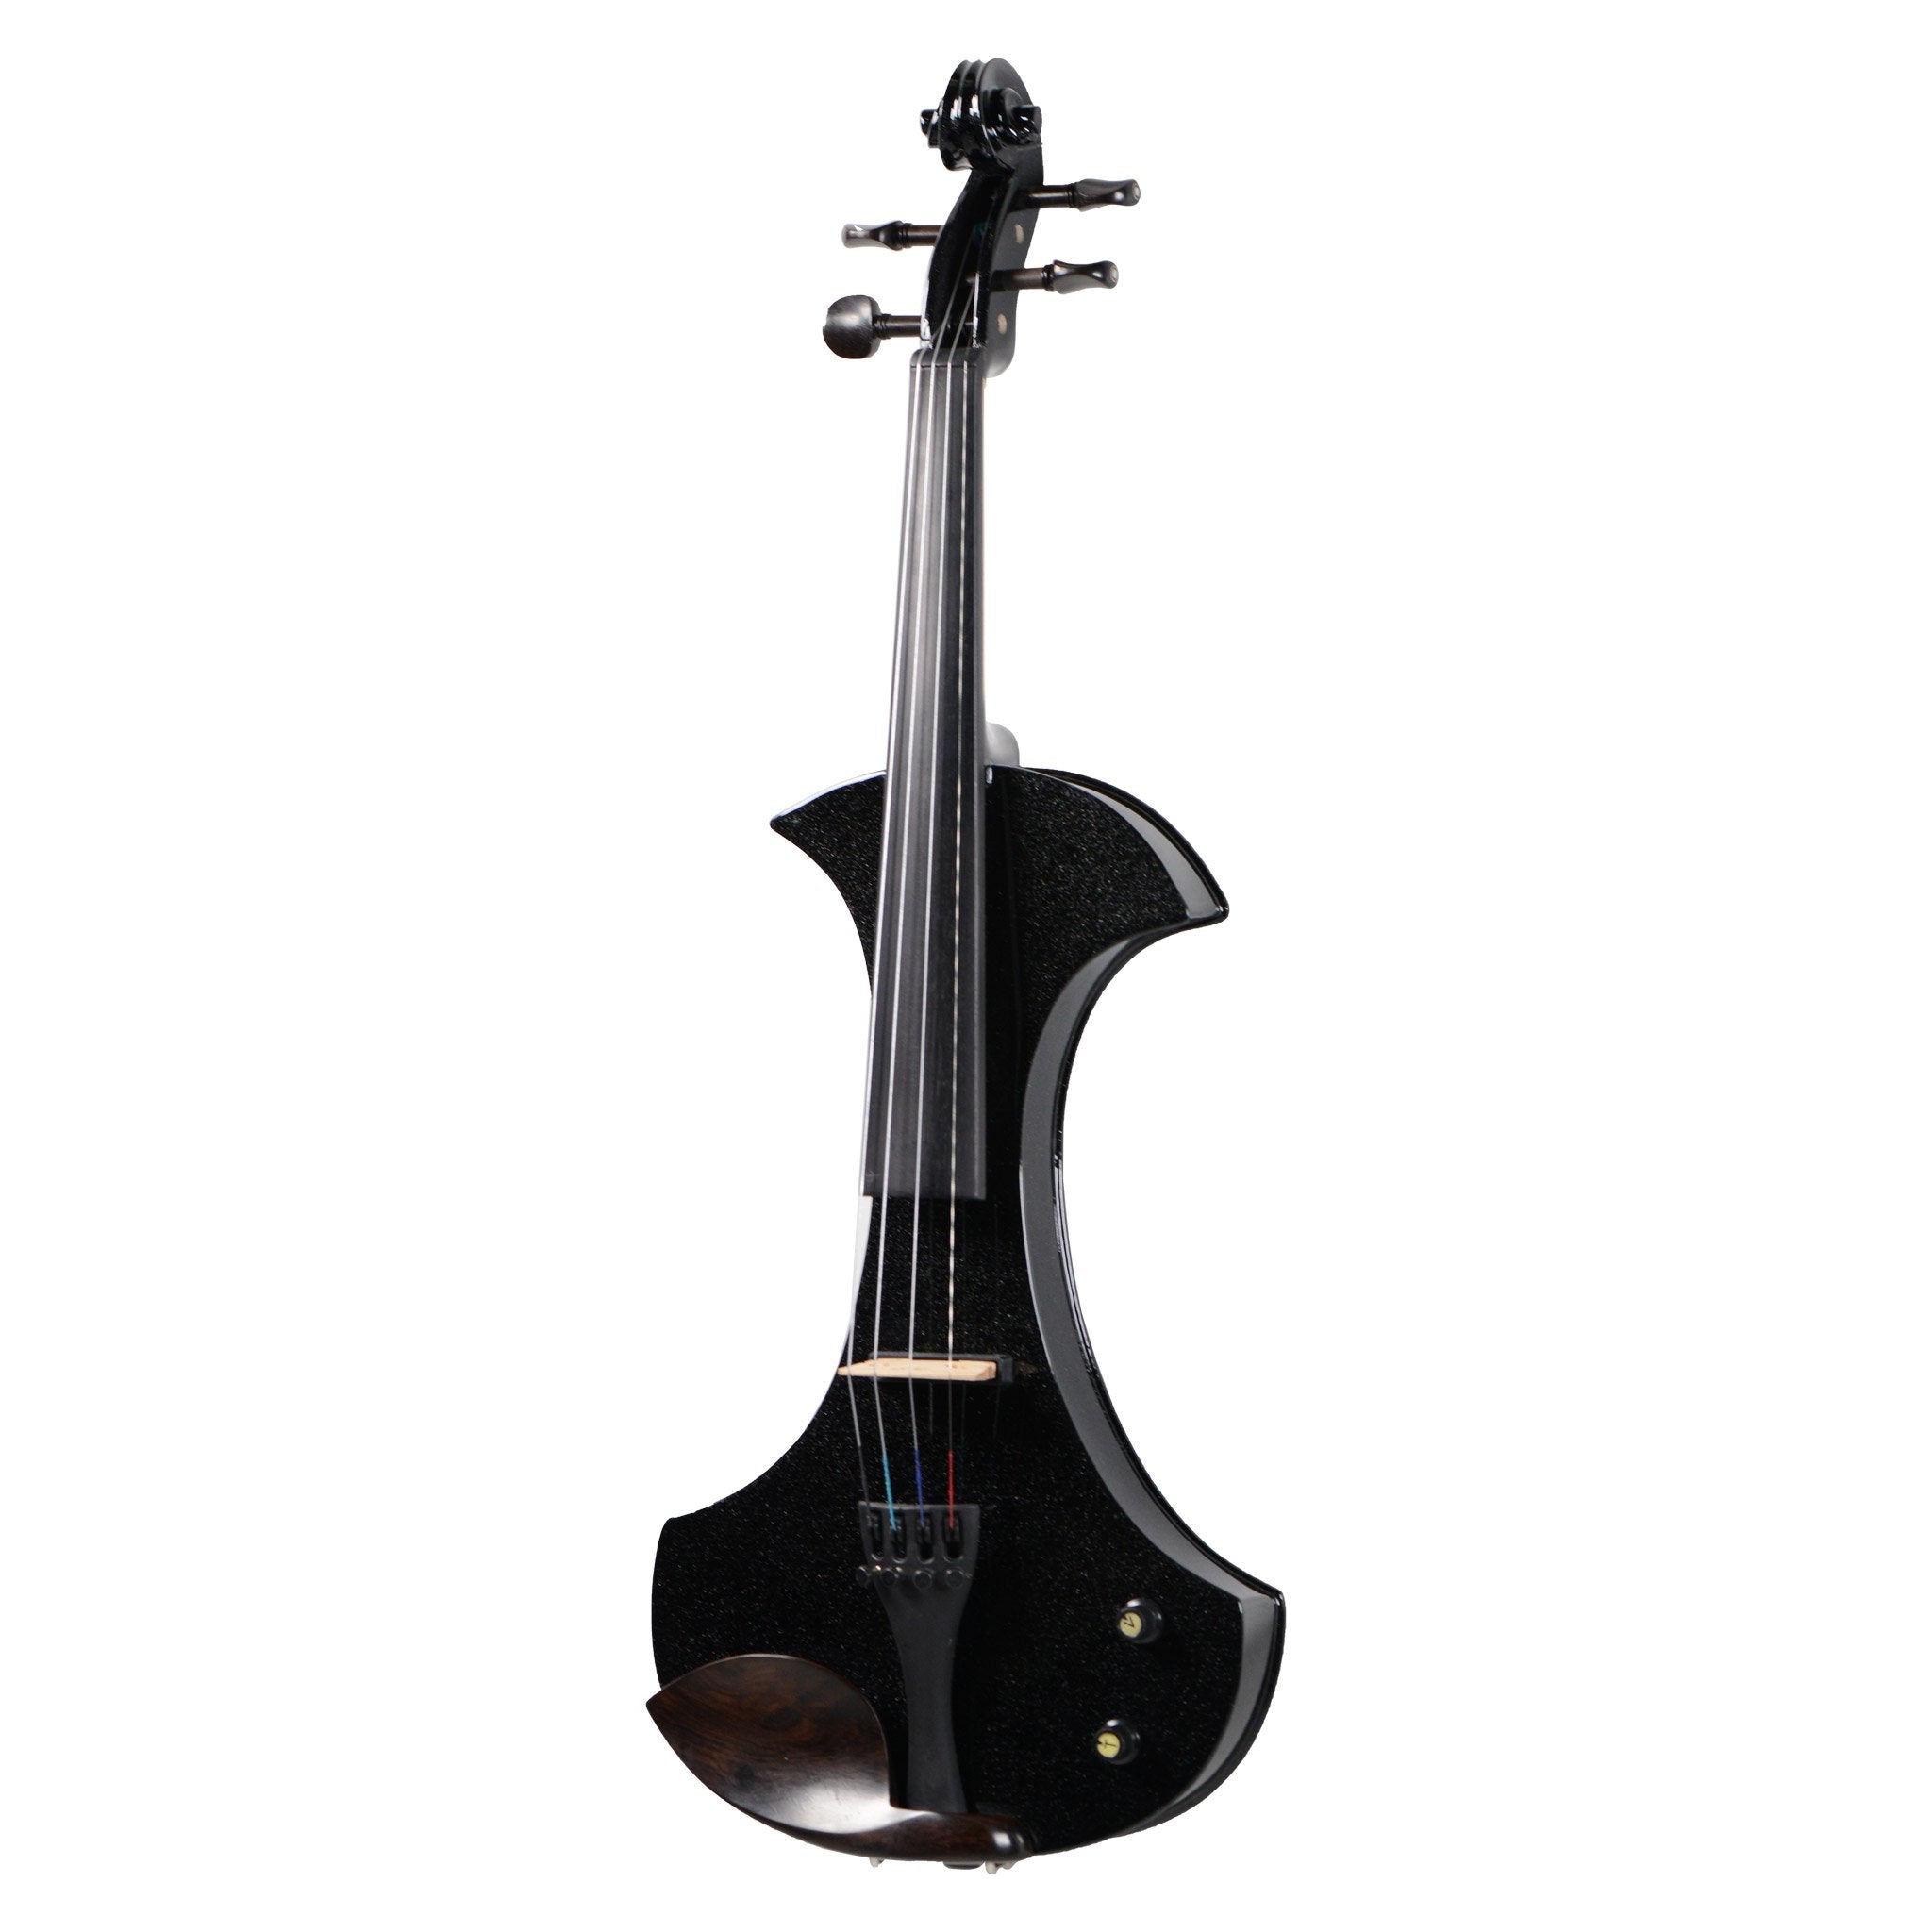 B-Stock Tower Strings Electric Pro Violin Outfit